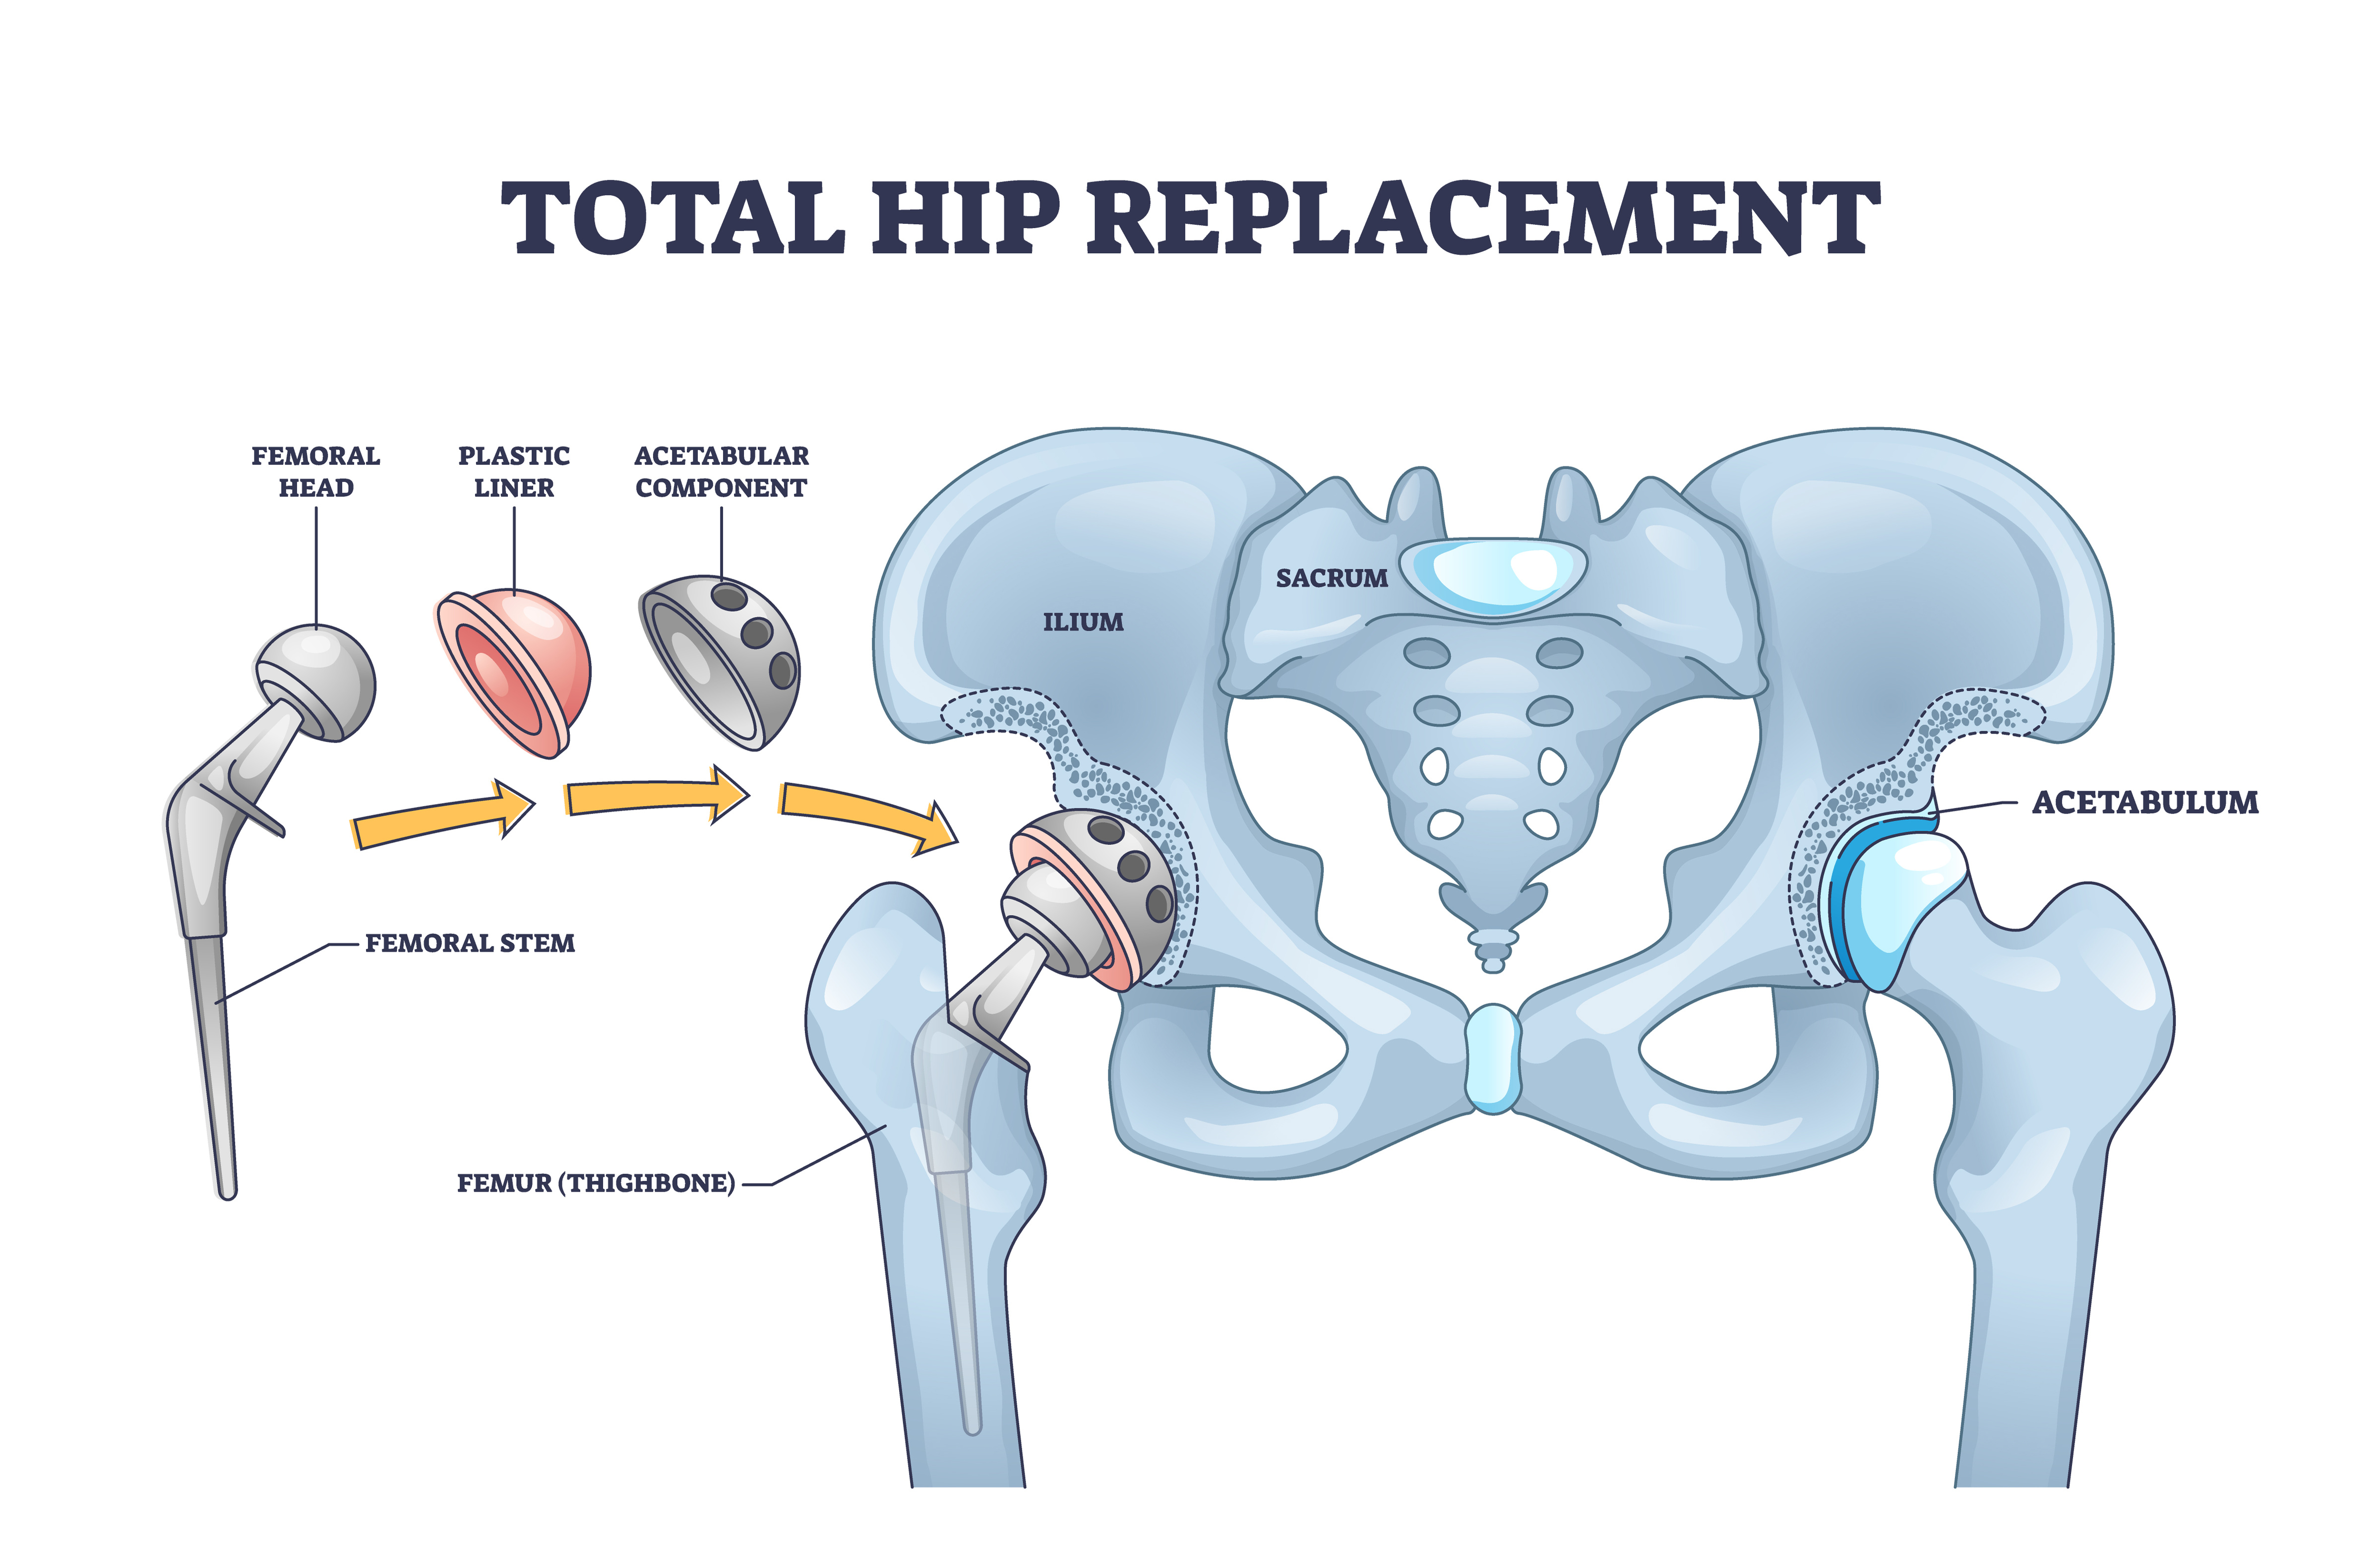 A diagram showing the components involved in total hip replacement surgery.